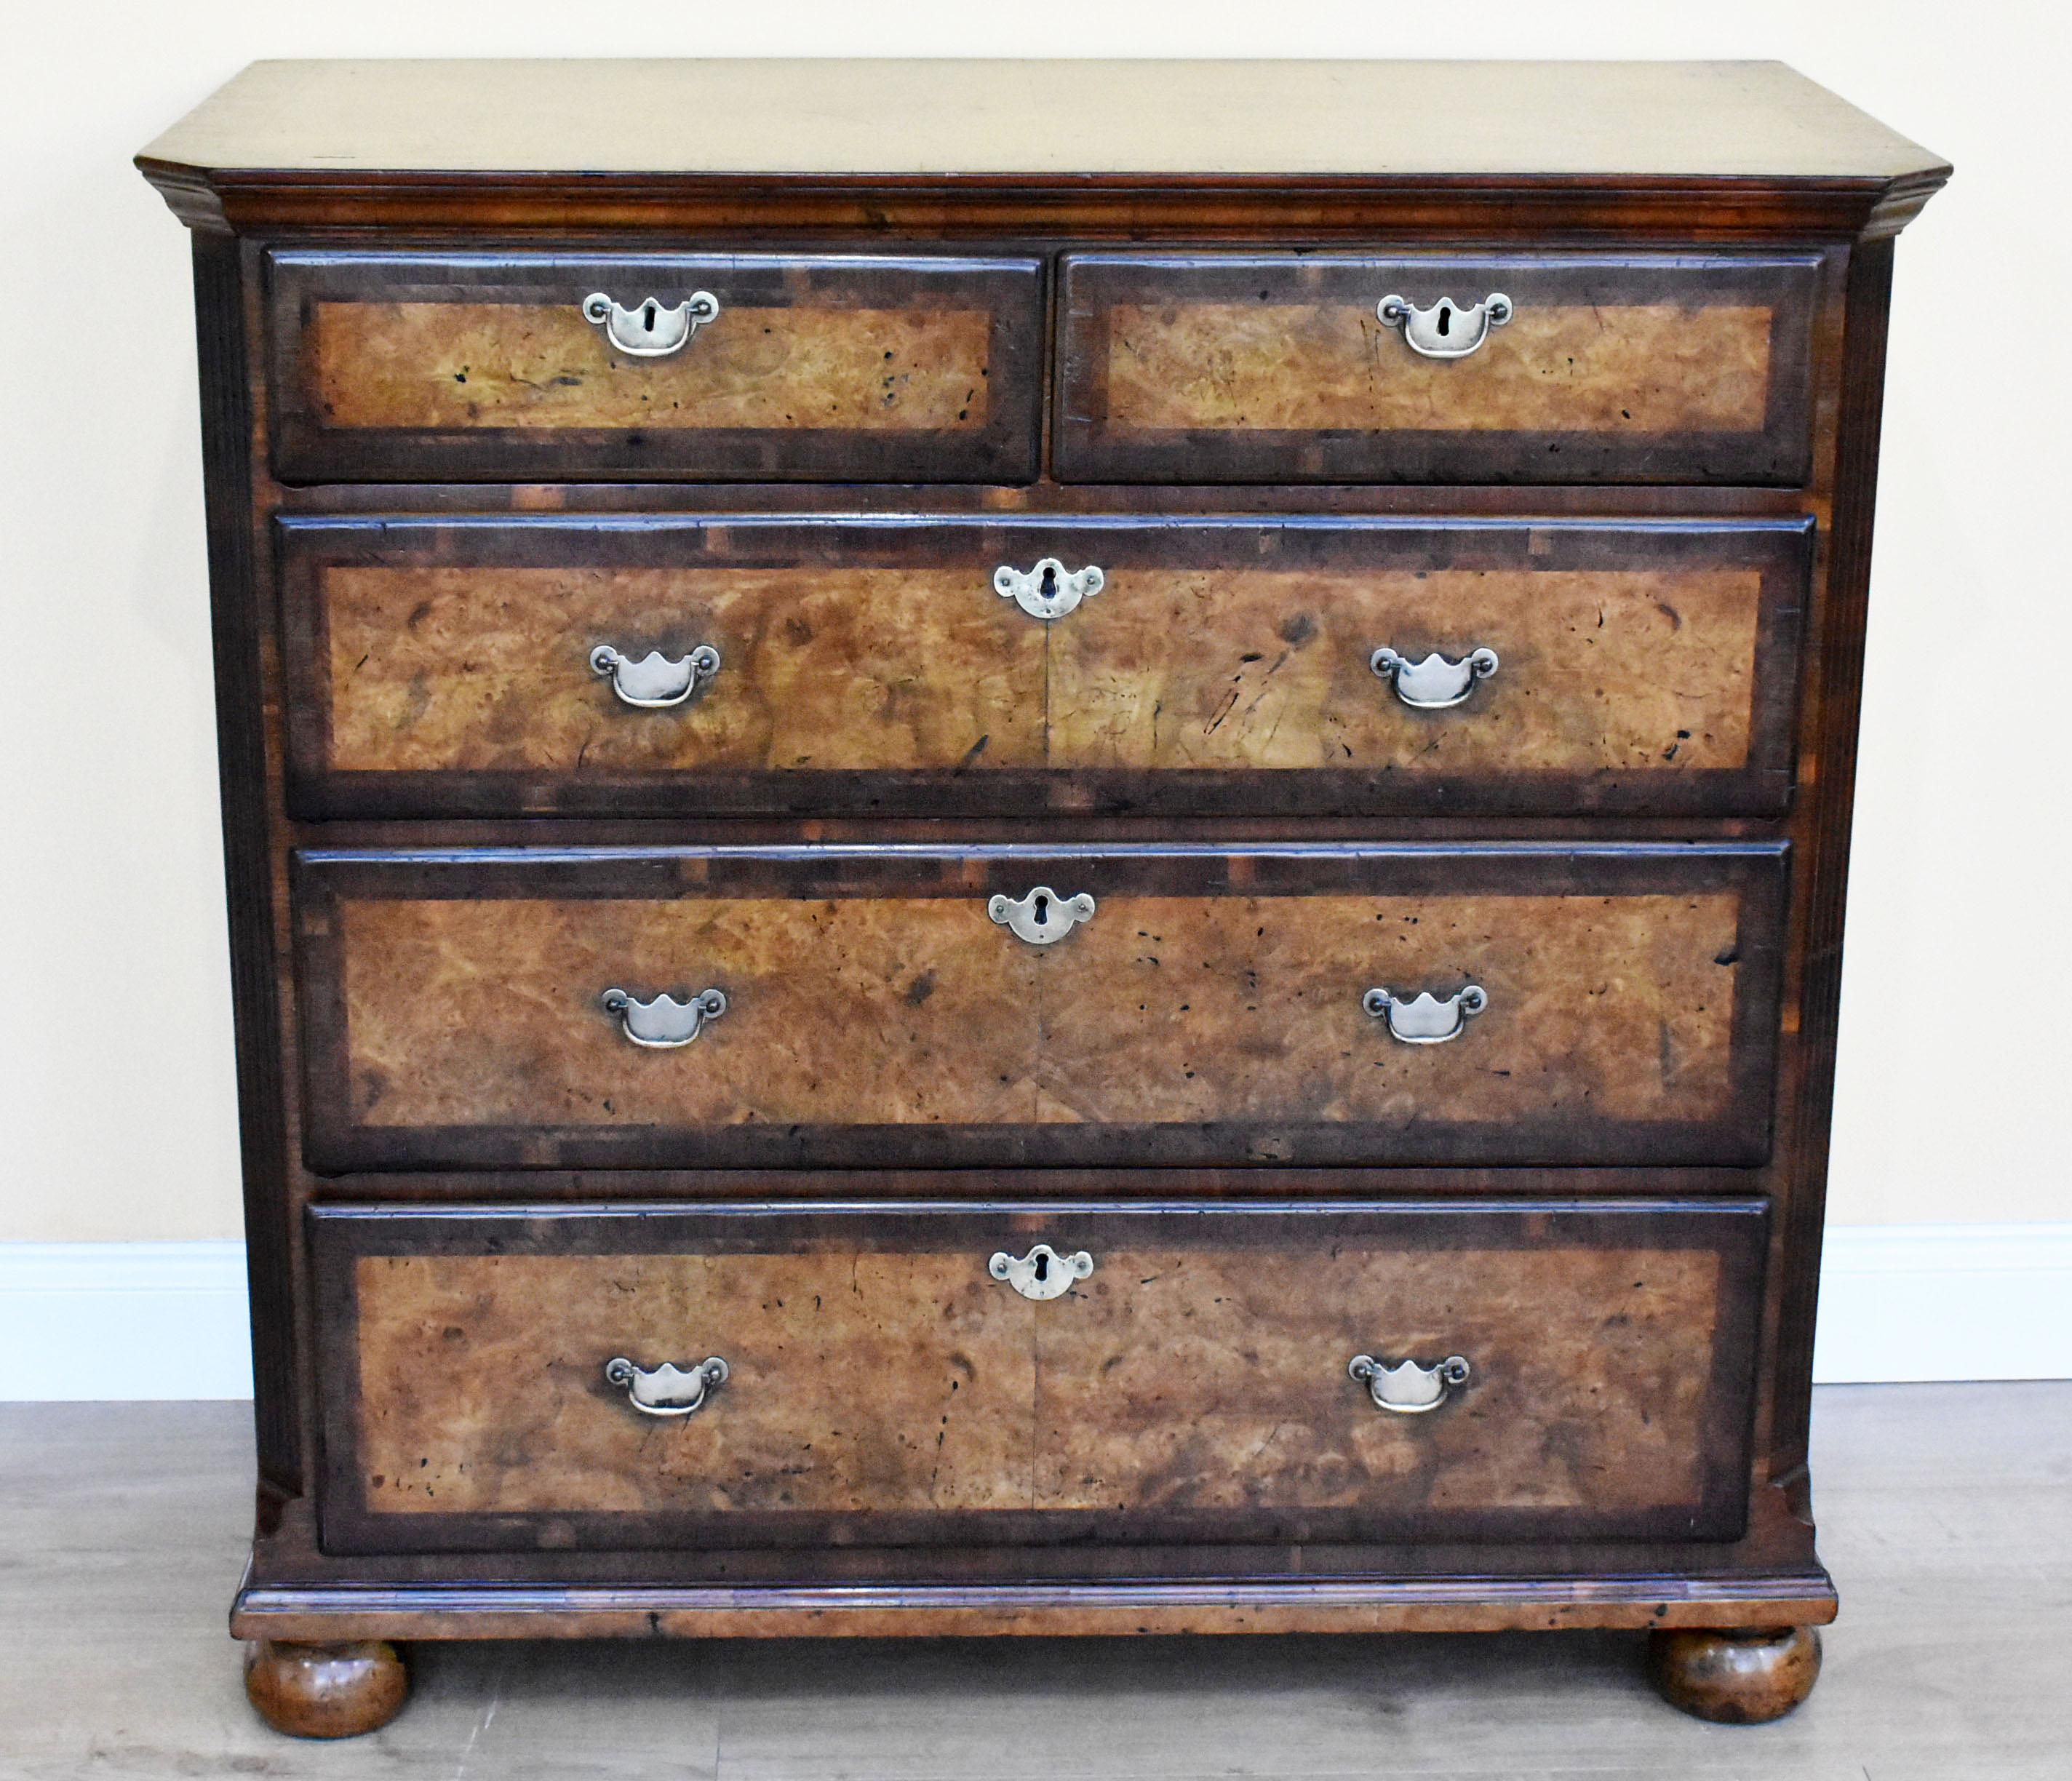 For sale is a good quality George III burr walnut chest of drawers. The top of the chest has walnut banding as well as herringbone inlay. Below this the chest has two short drawers, over three graduated drawers, each with walnut banding and